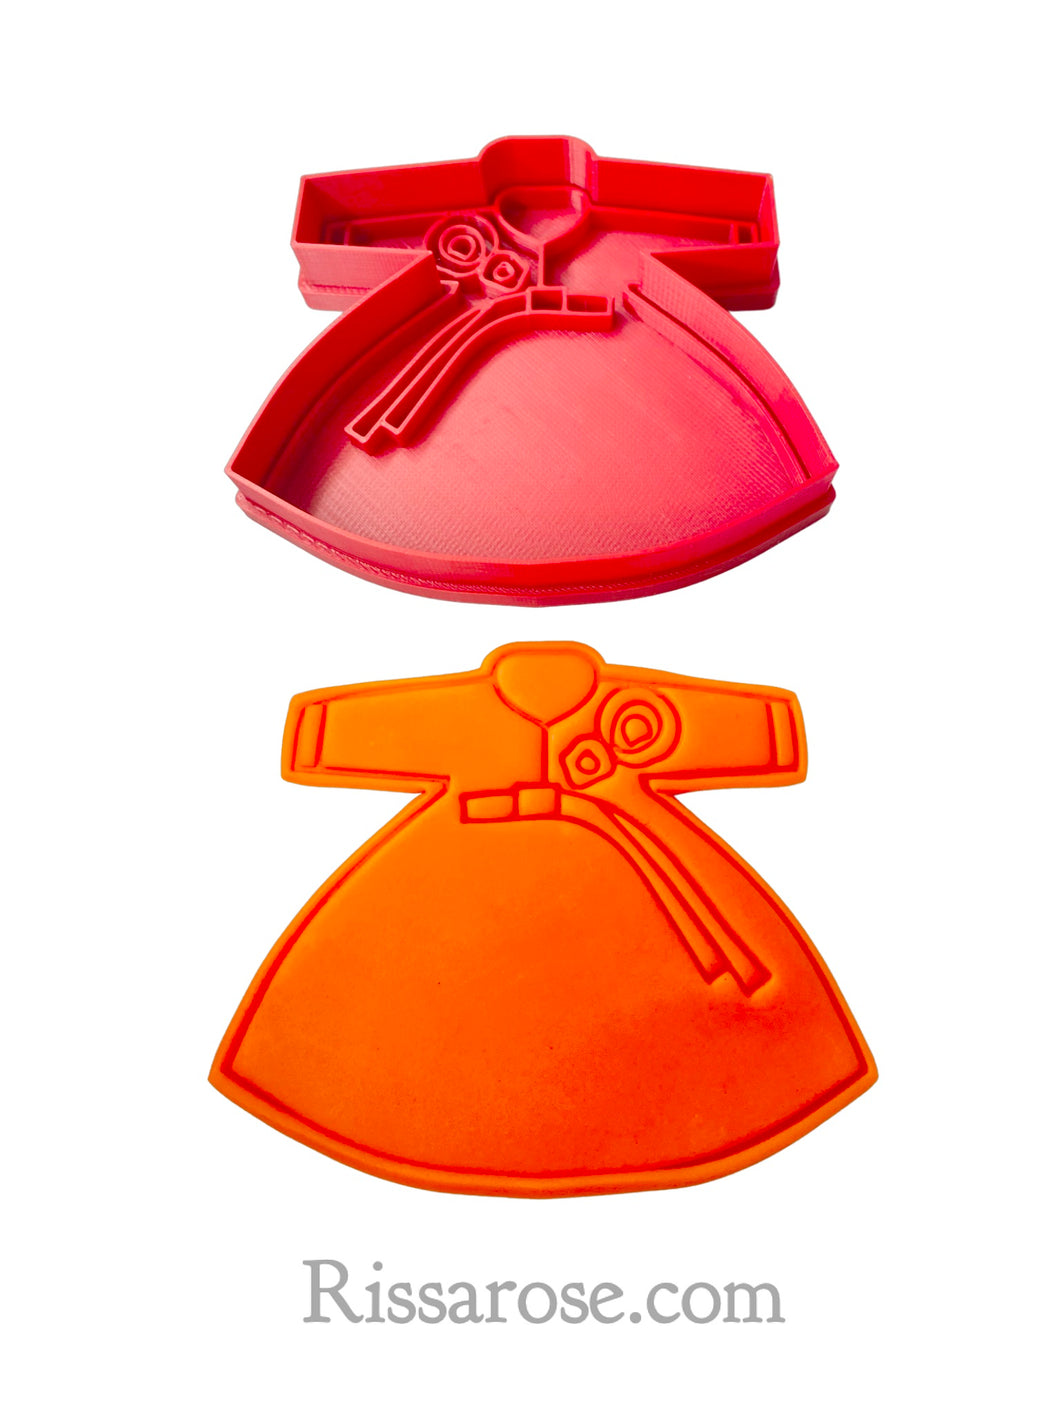 hanbok cookie cutter and stamp - traditional korean clothes chosŏn-ot with roses